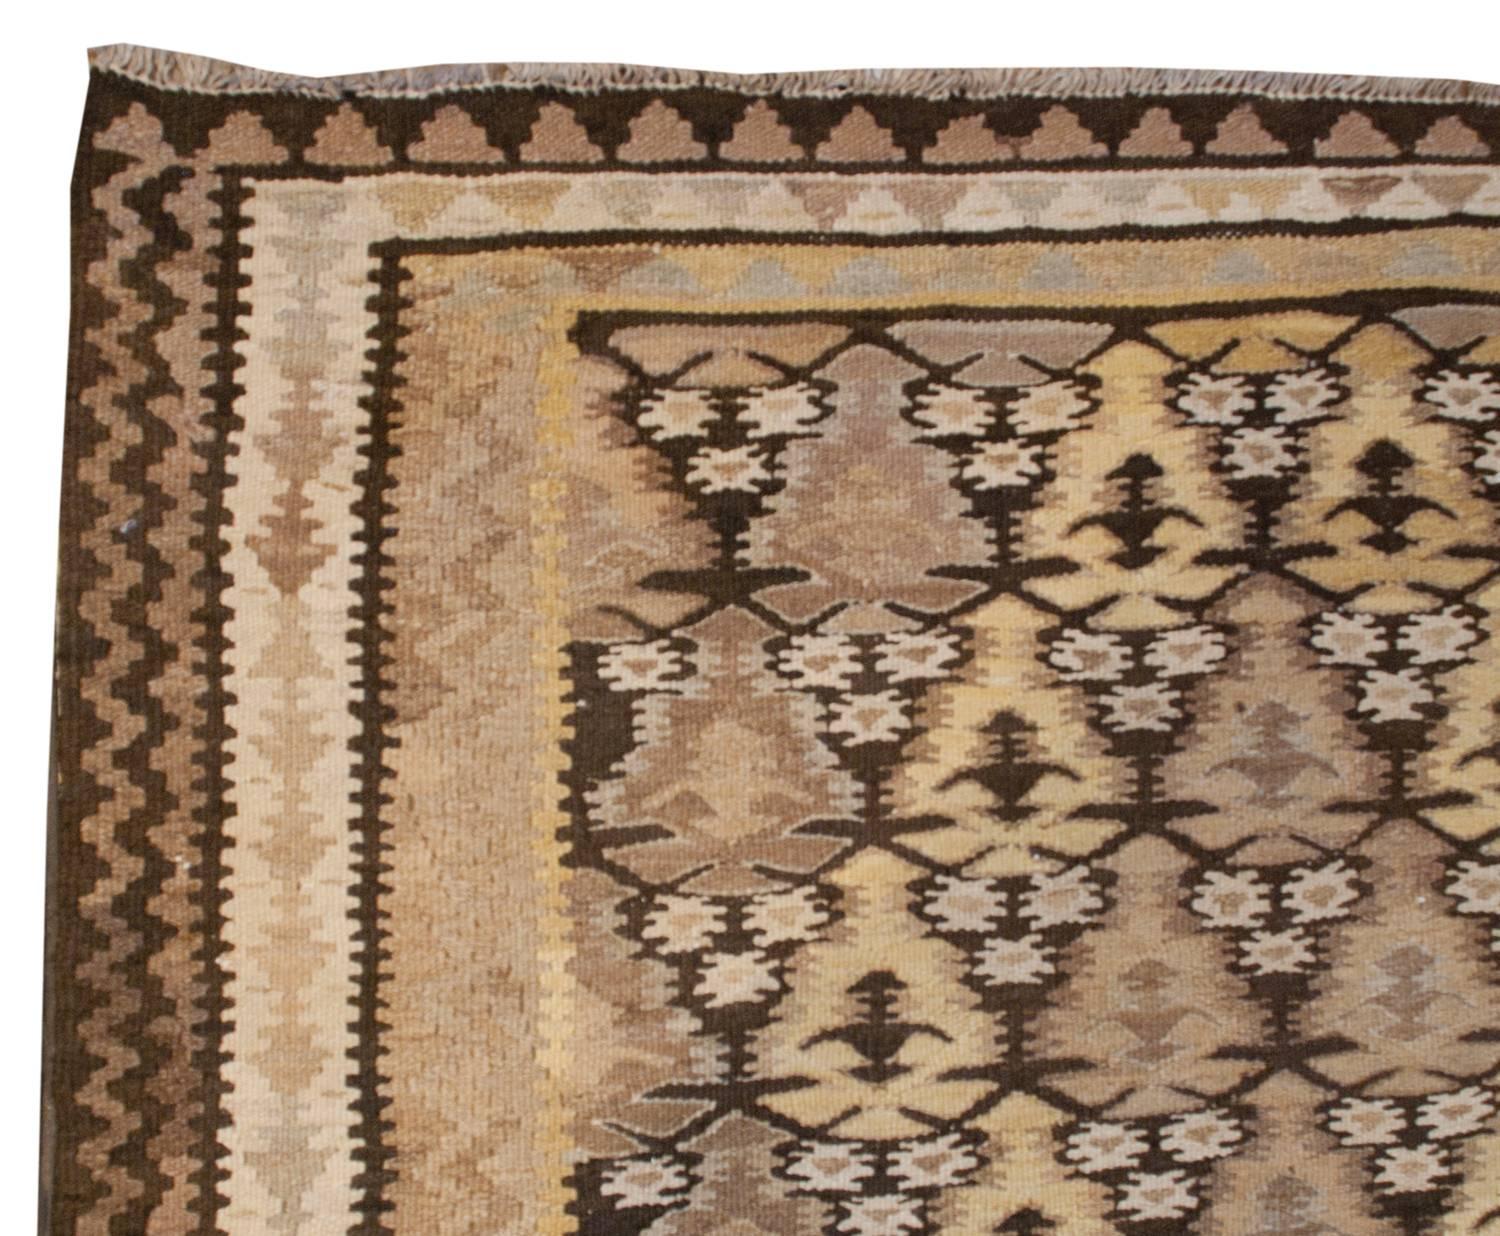 An early 20th century Persian Qazvin Kilim runner with a beautiful all-over tree-of-life pattern, woven with a subtle diamond pattern.  The border is wide, with three distinct geometric patterns.  